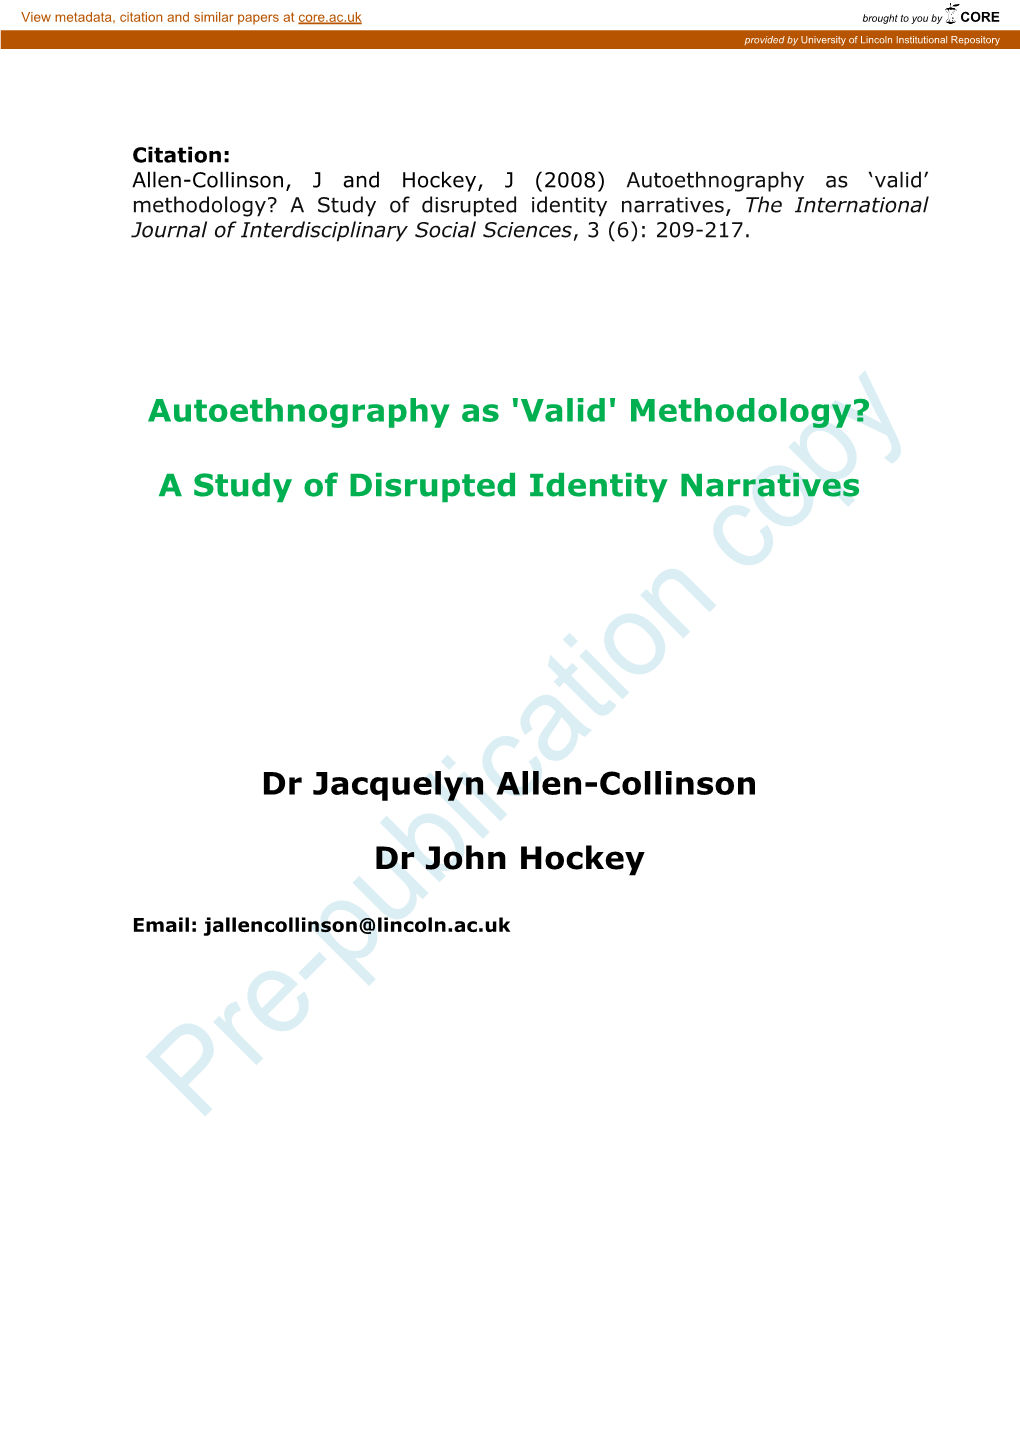 Autoethnography As ‘Valid’ Methodology? a Study of Disrupted Identity Narratives, the International Journal of Interdisciplinary Social Sciences, 3 (6): 209-217